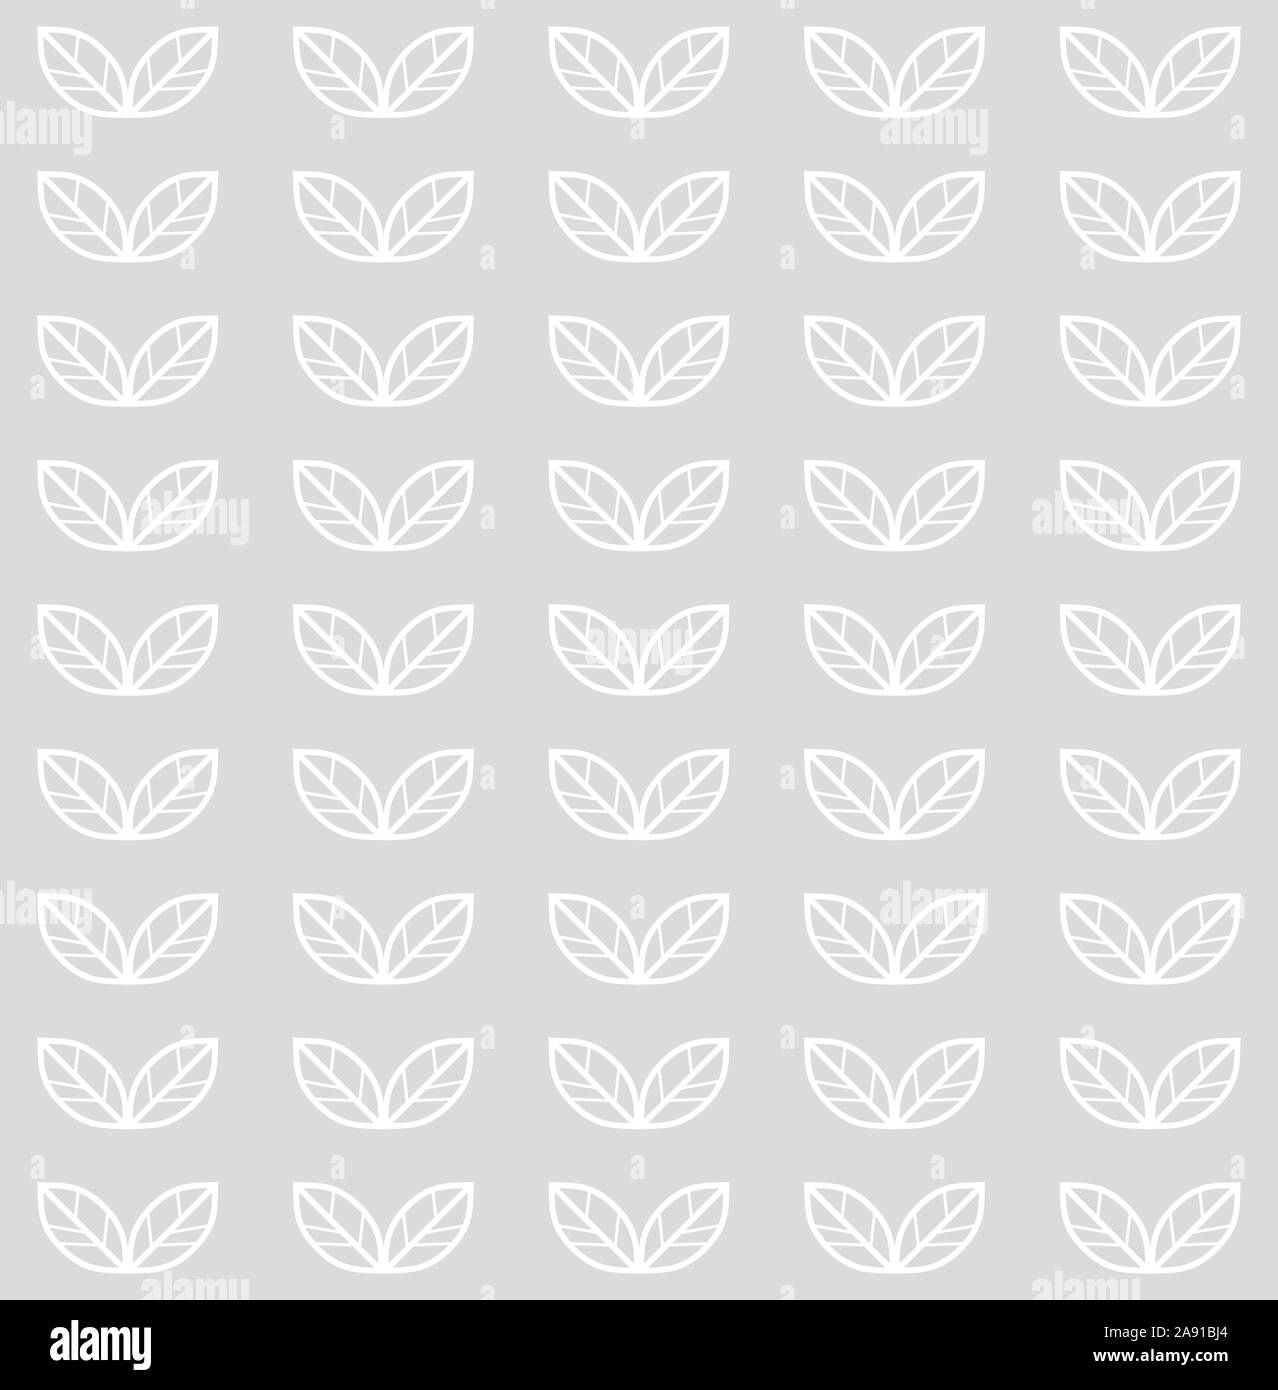 Seamless pattern with leaves. Vector monochrome scandinavian floral background with white leaves in a row Stock Vector